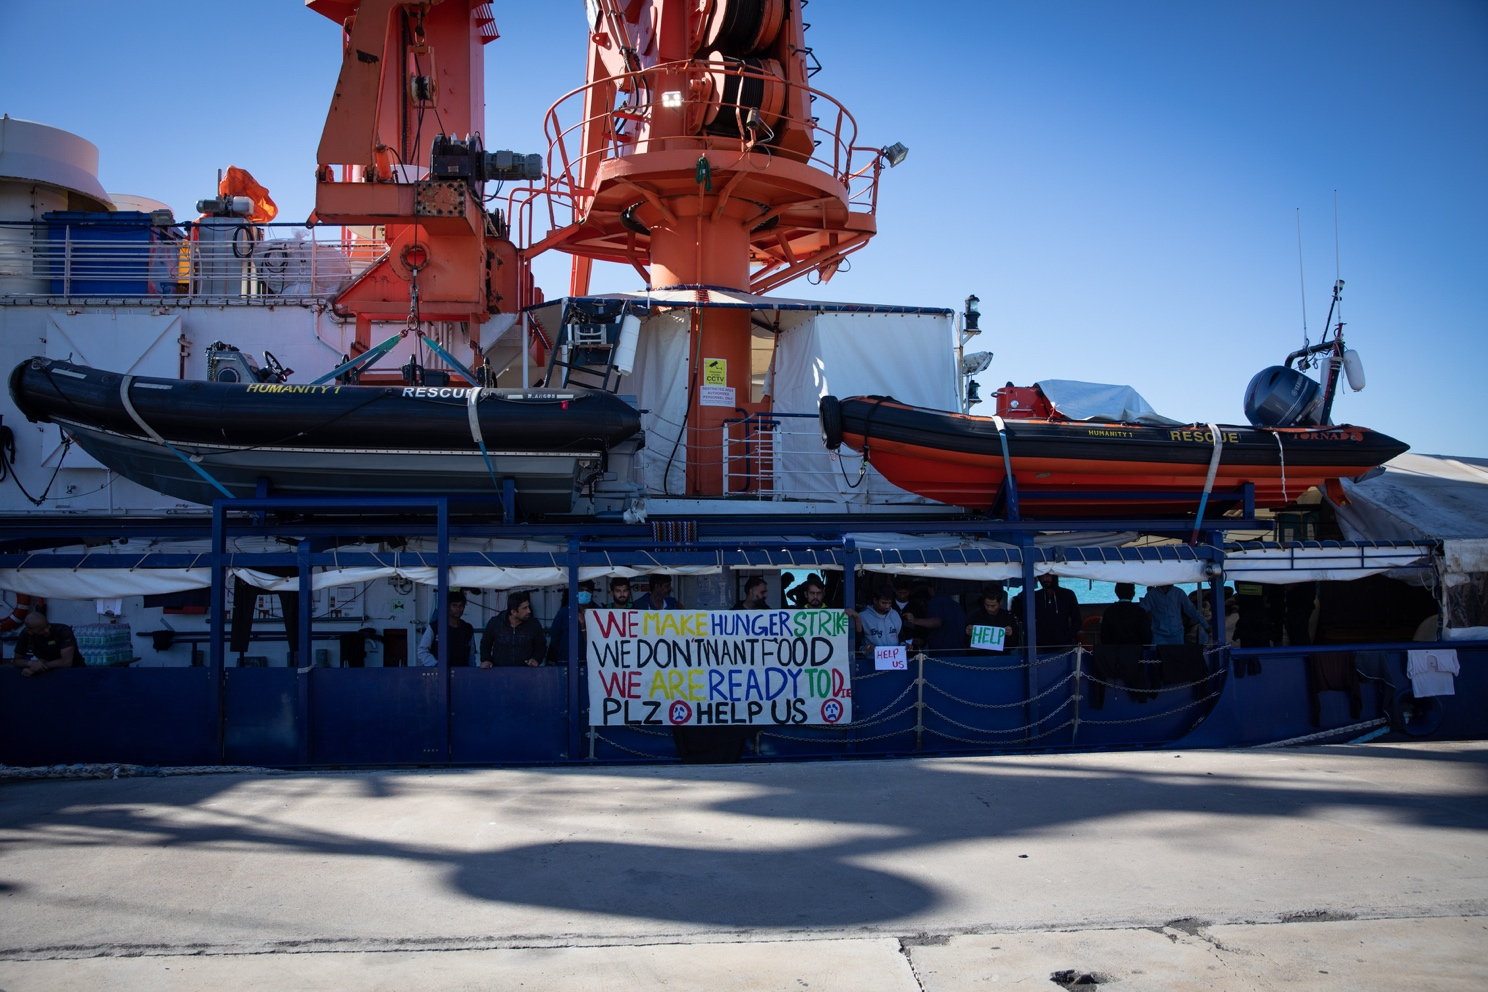 People protesting holding signs on a rescue ship